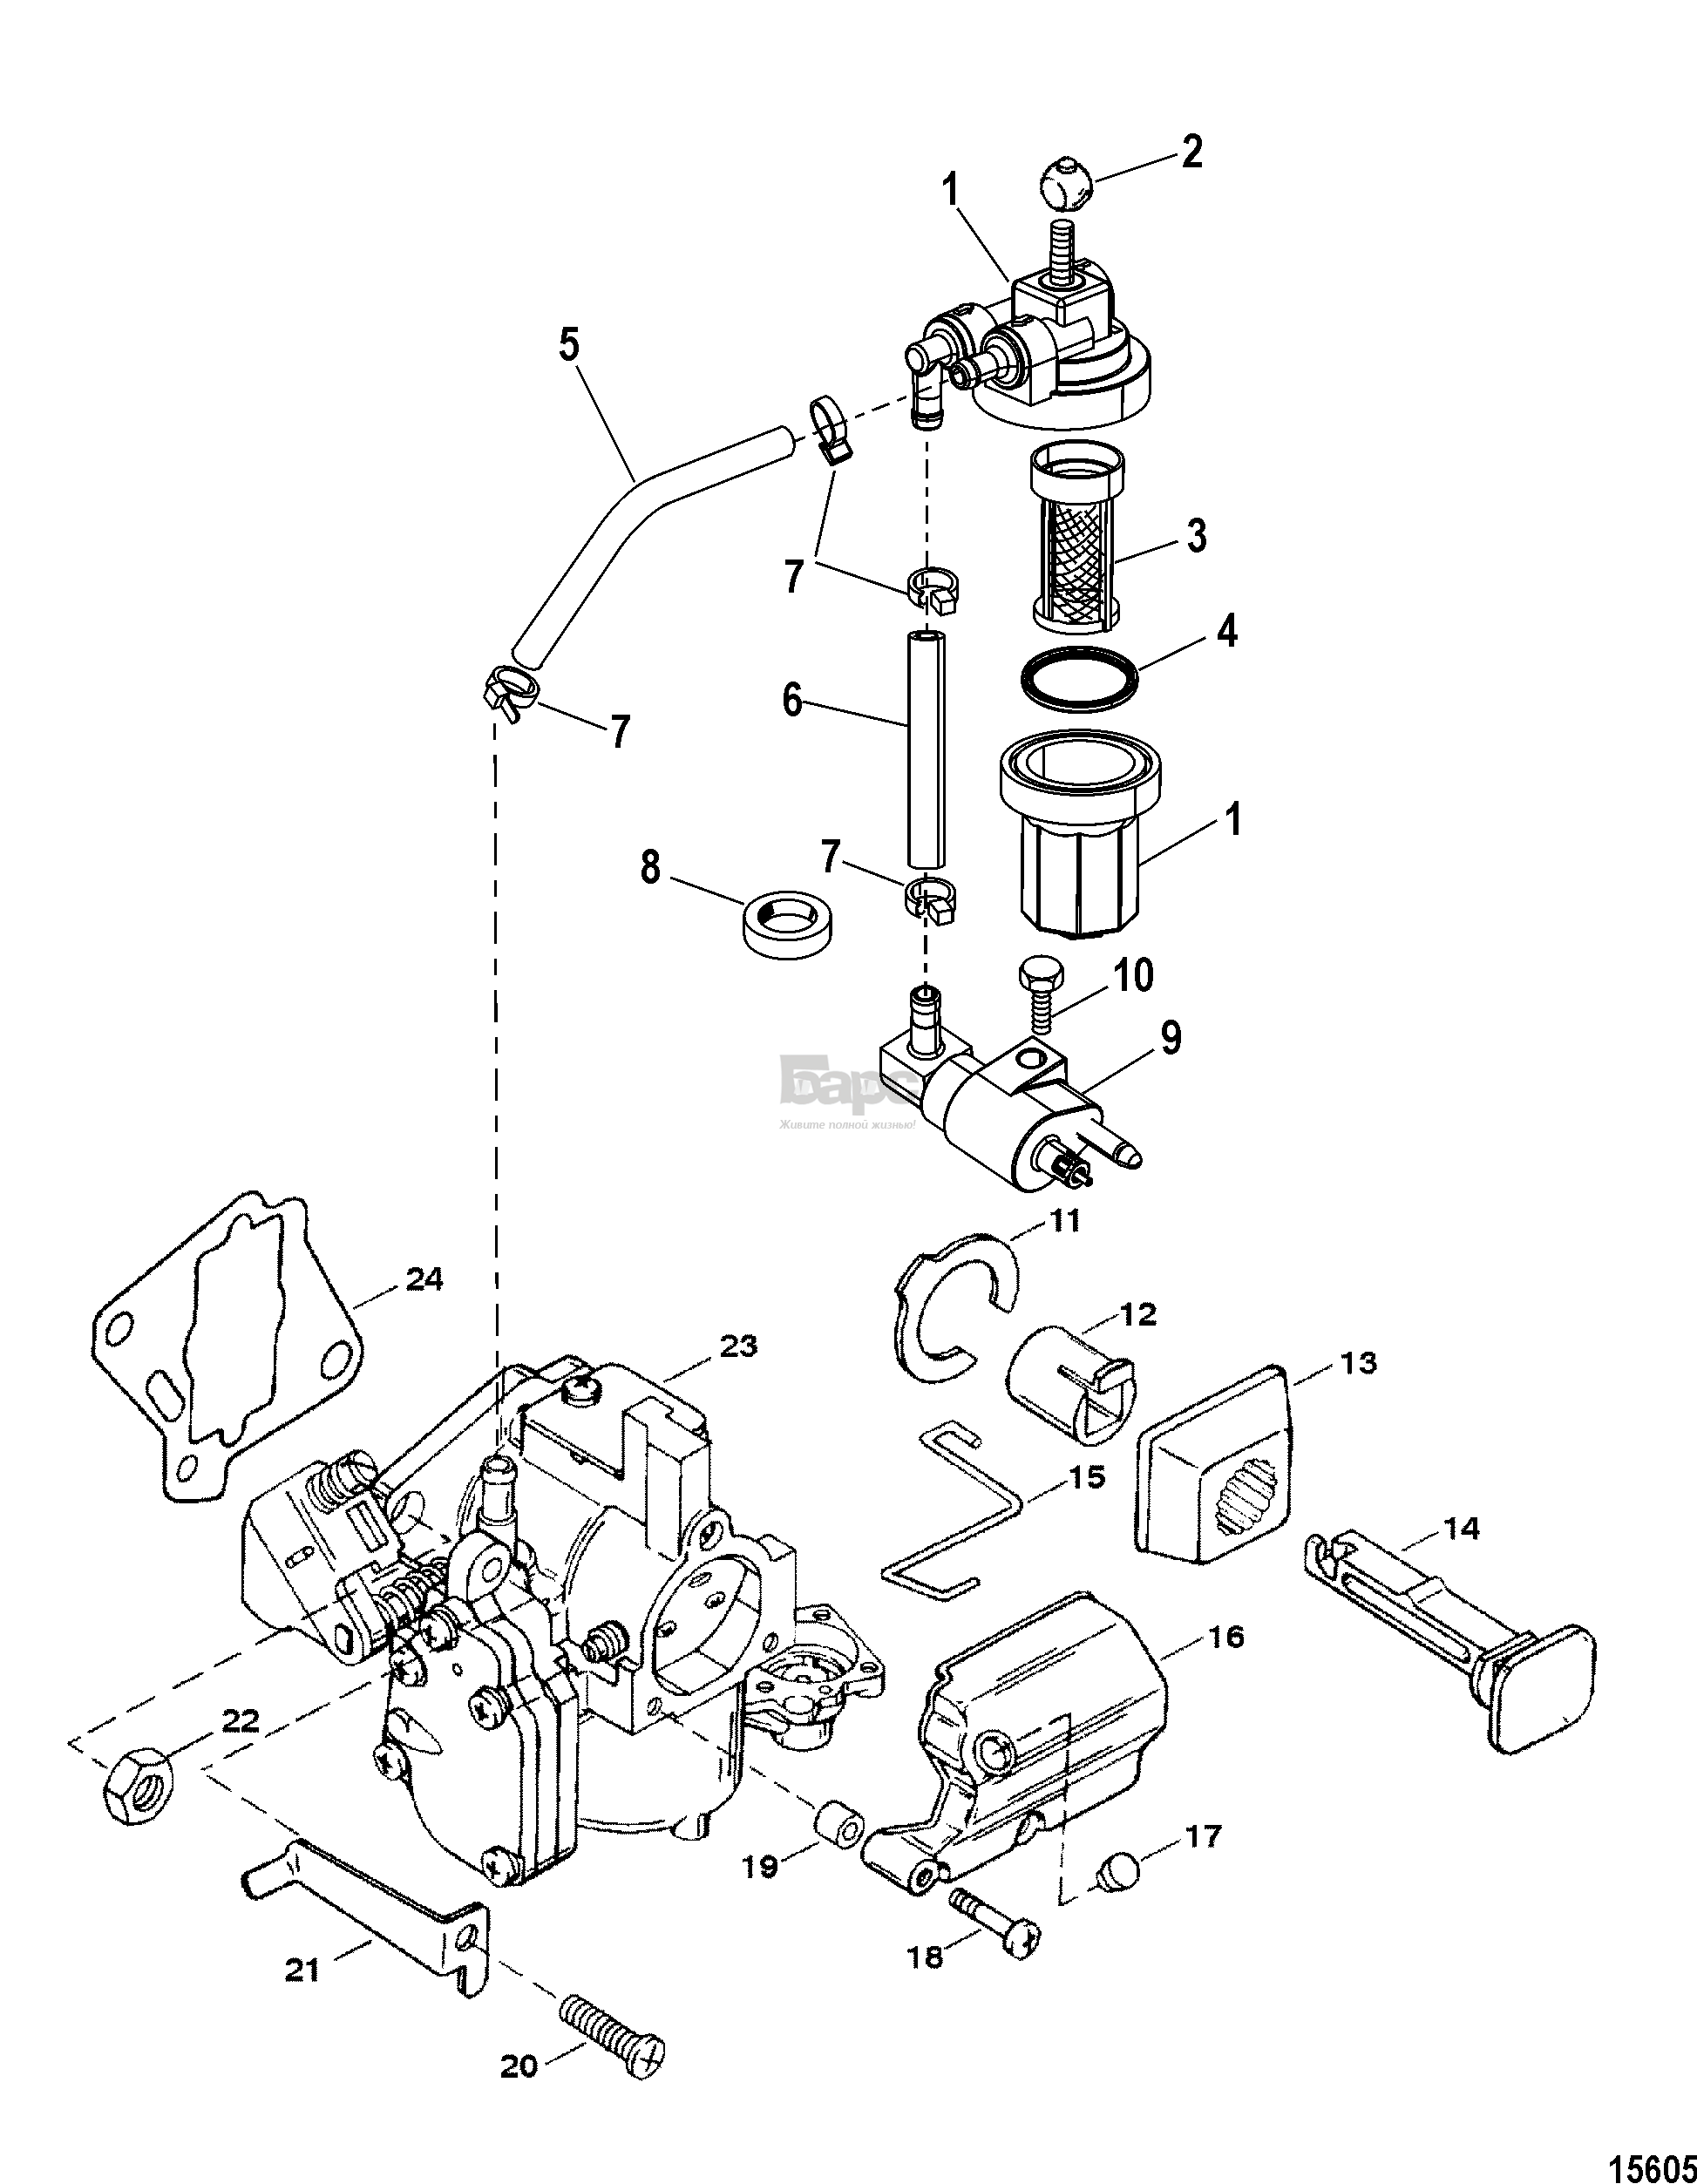 Fuel System Components(Commercial Engines)